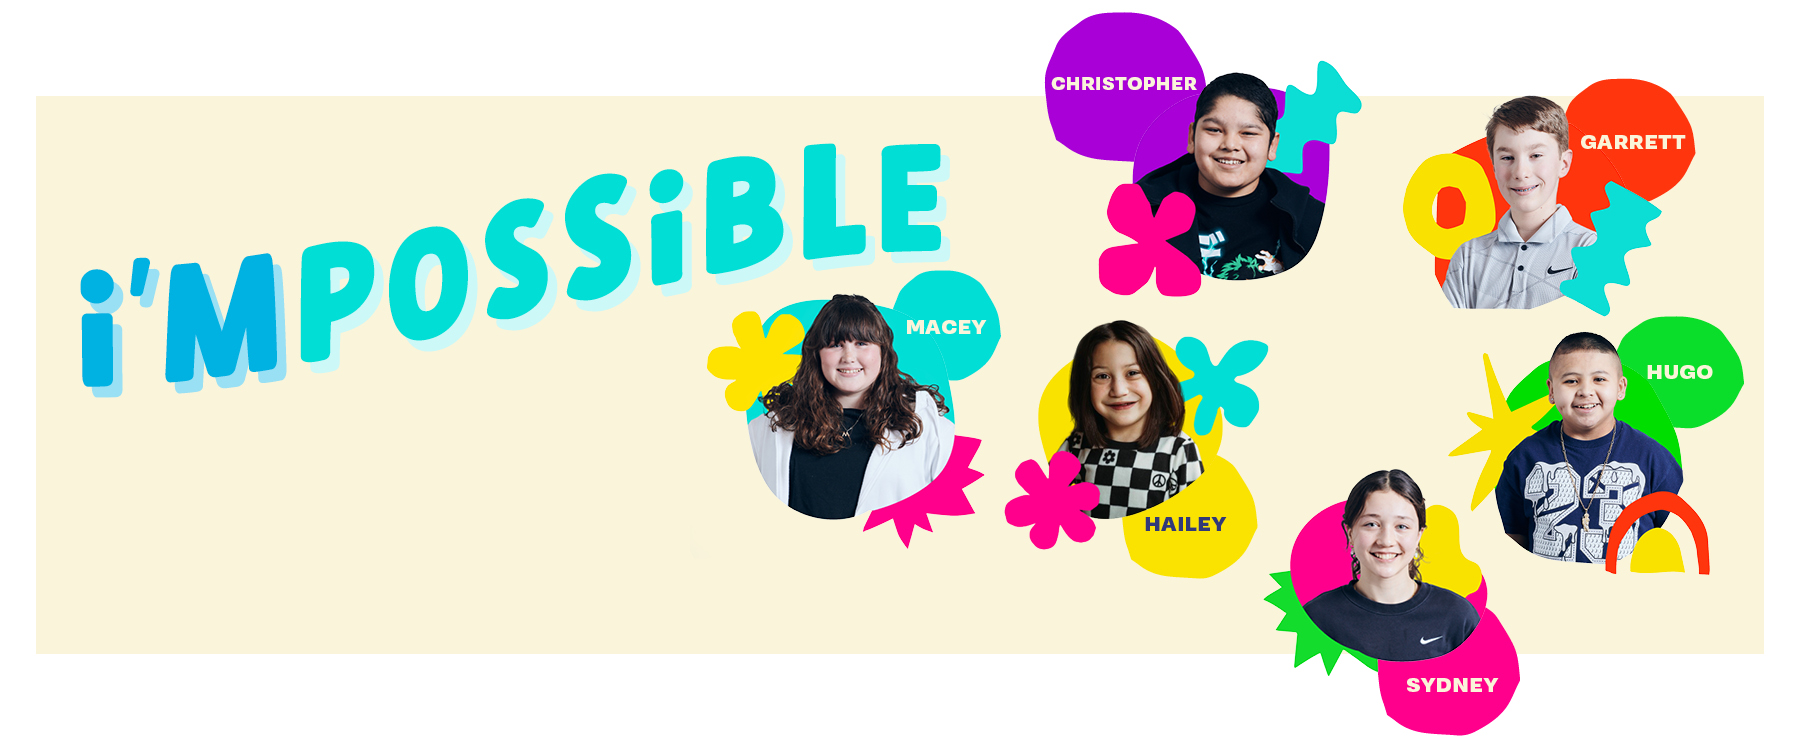 Doernbecher Freestyle "I'mpossible" graphic showing the 6 patient designers with colorful shapes on a butter yellow background